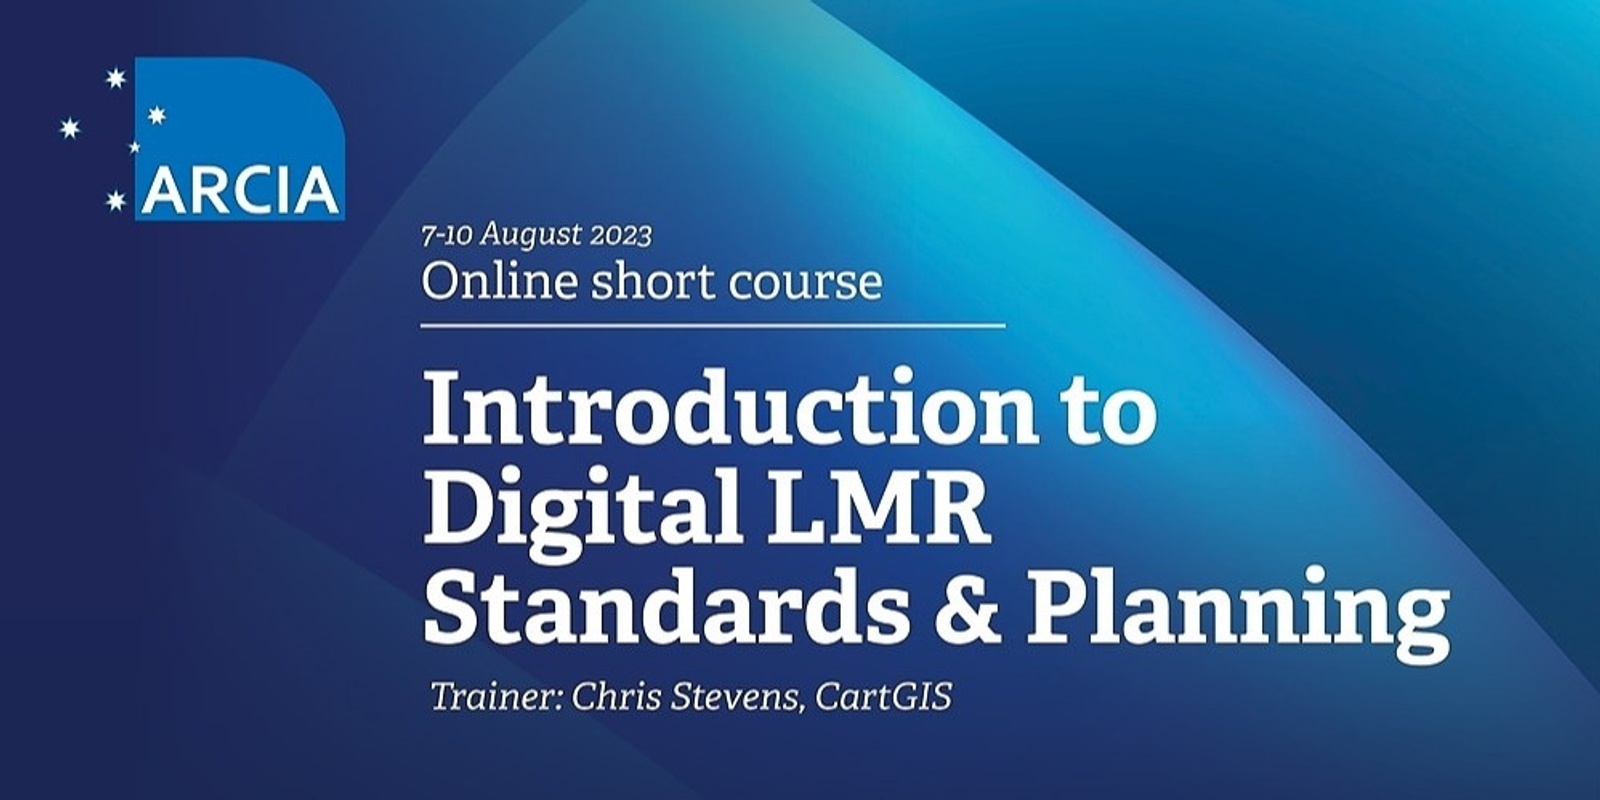 ARCIA Introduction to Digital LMR Standards and Planning [Online short course]